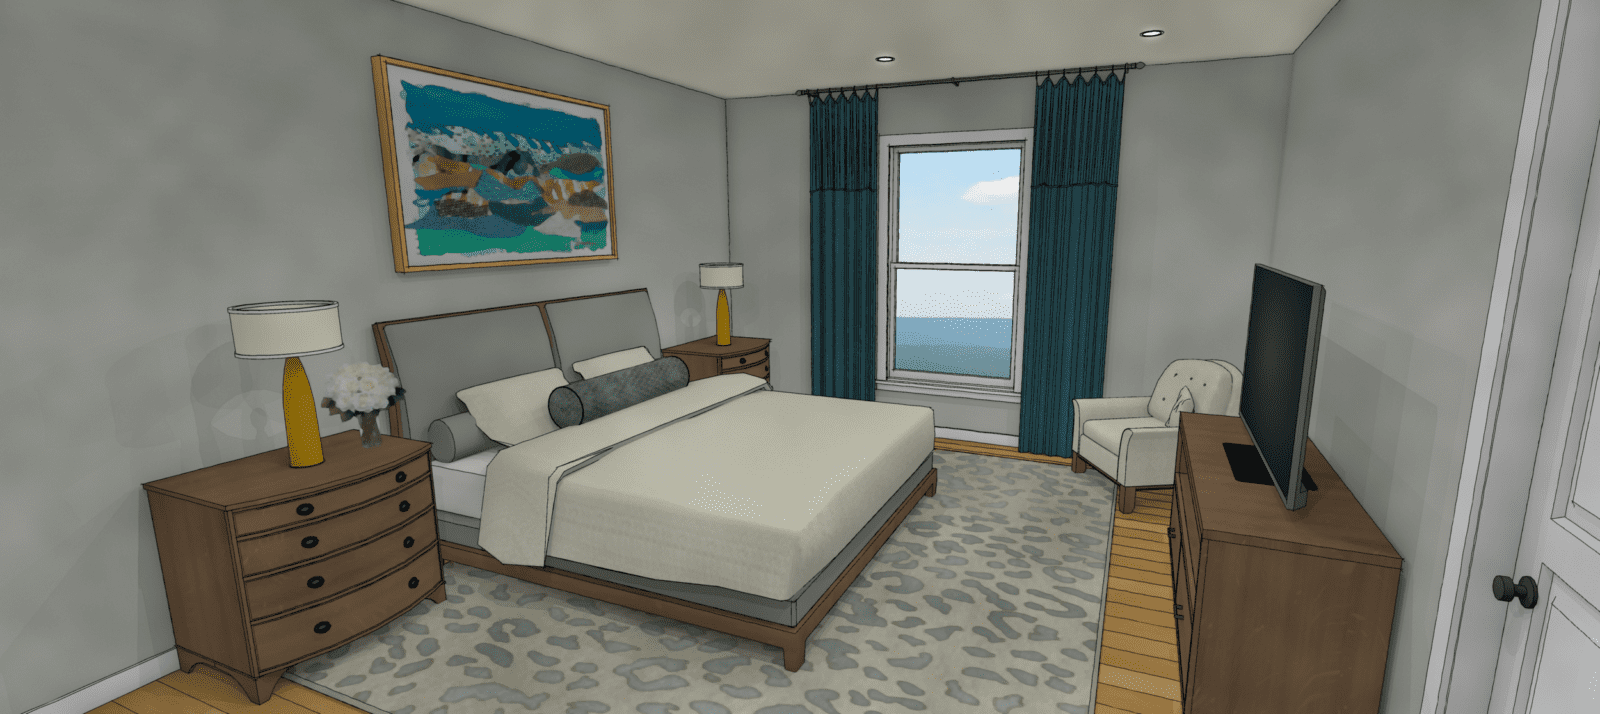 Decorating Bedroom Wall With Pictures Virtual